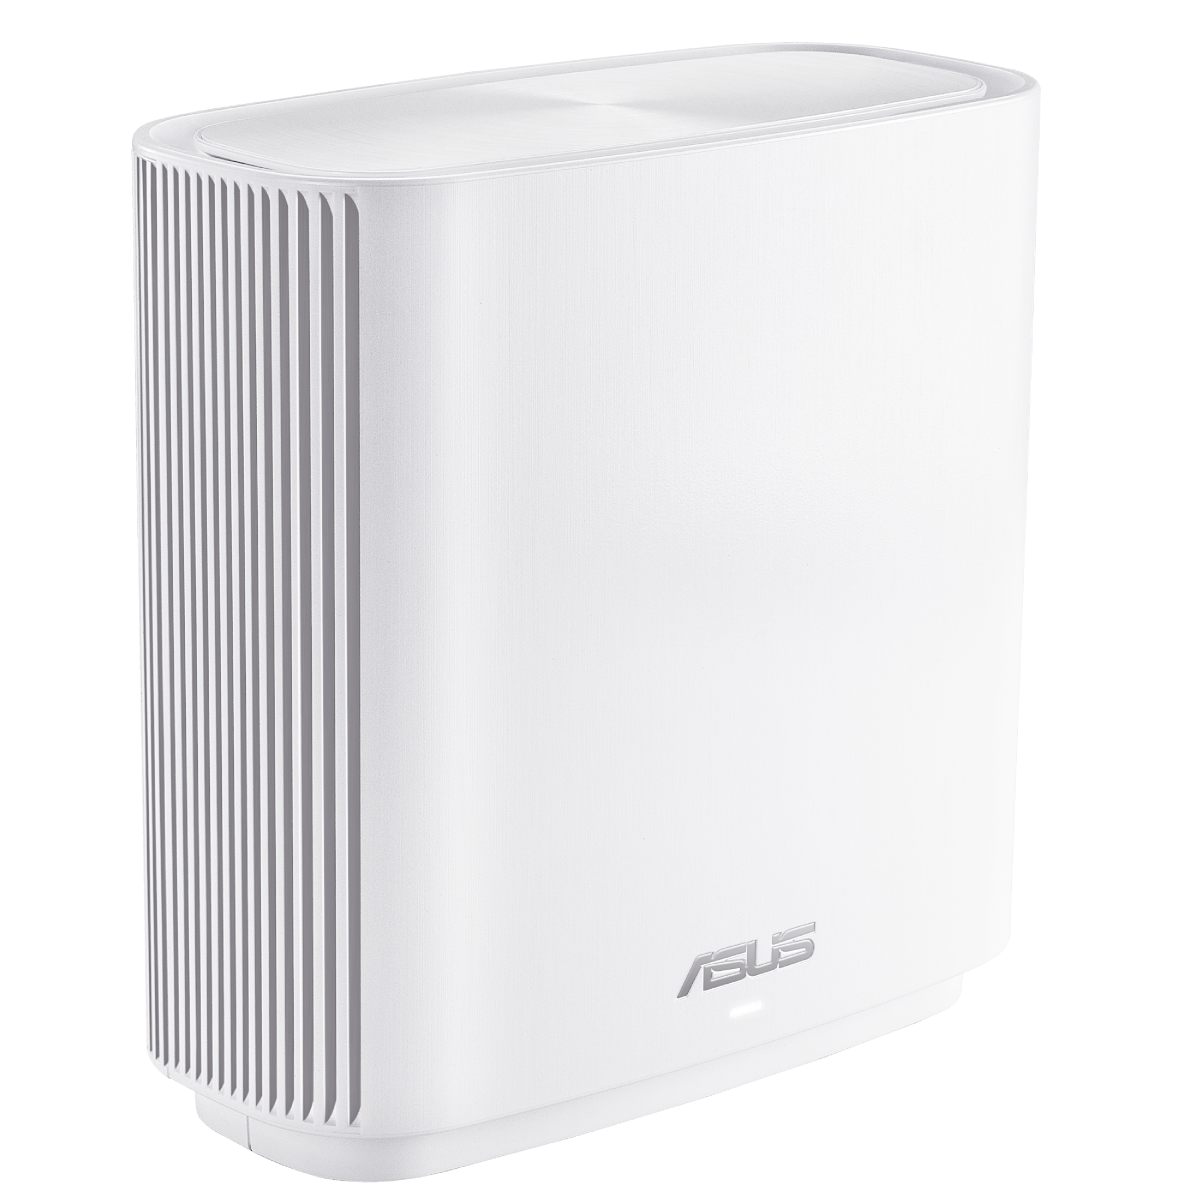 ASUS ZenWifi AC (CT8) AC3000 WiFi 5 Mesh System, Pack of 1 - White